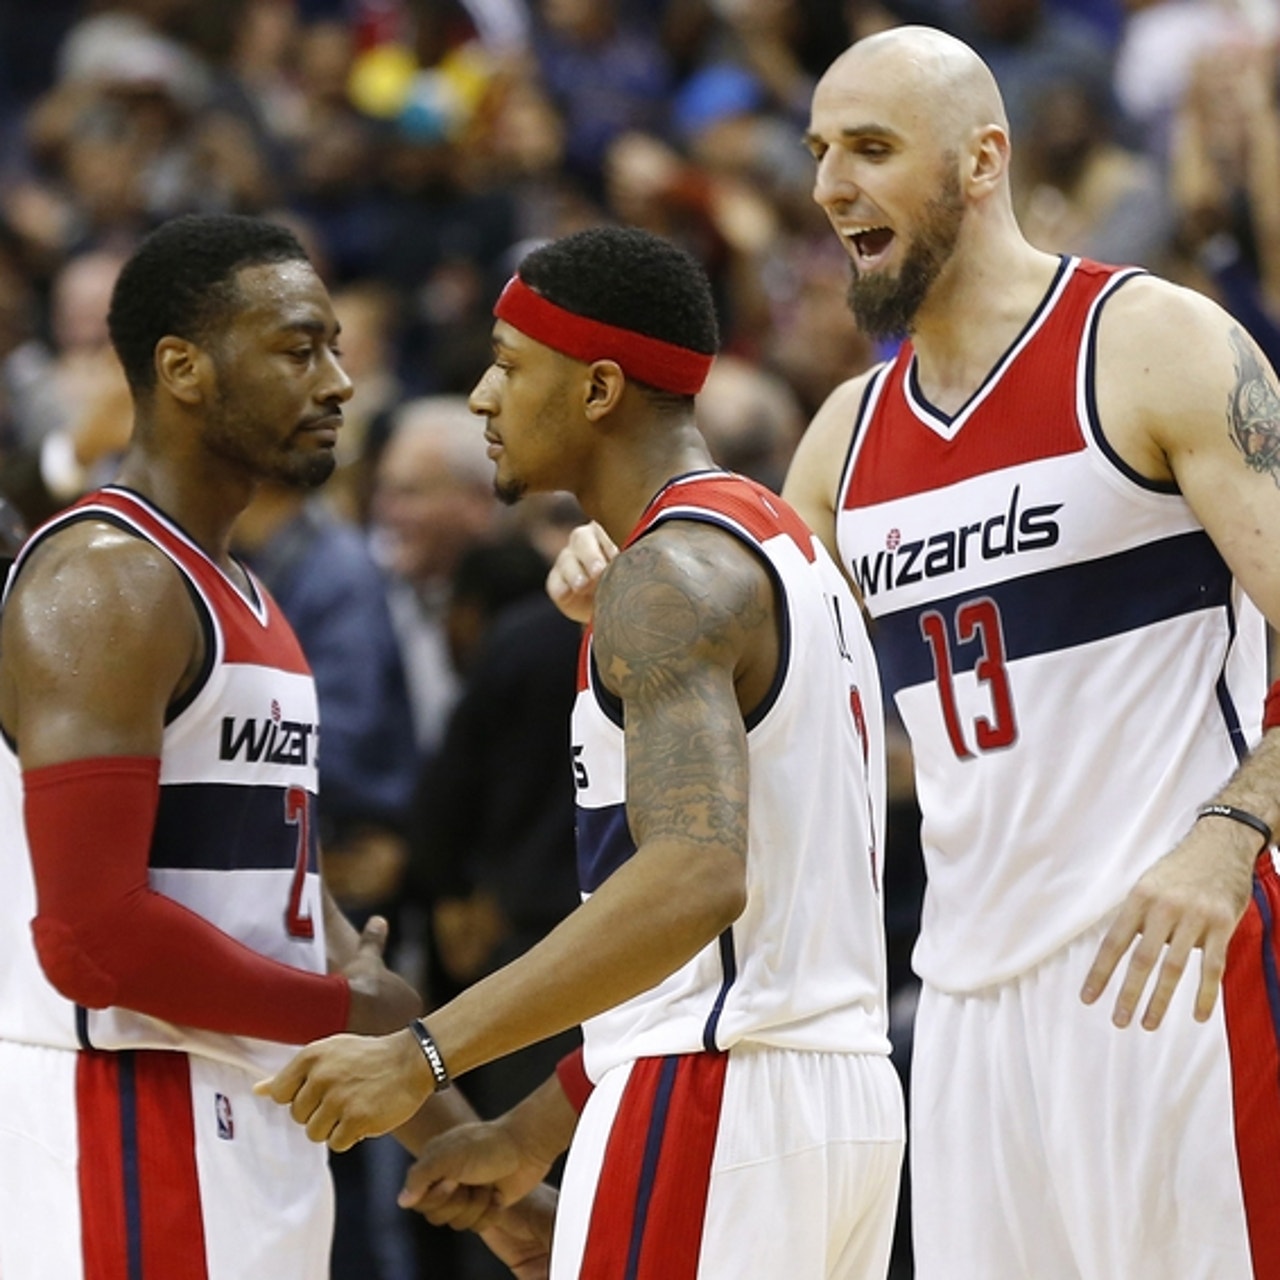 John Wall and Marcin Gortat of the Washington Wizards have met to